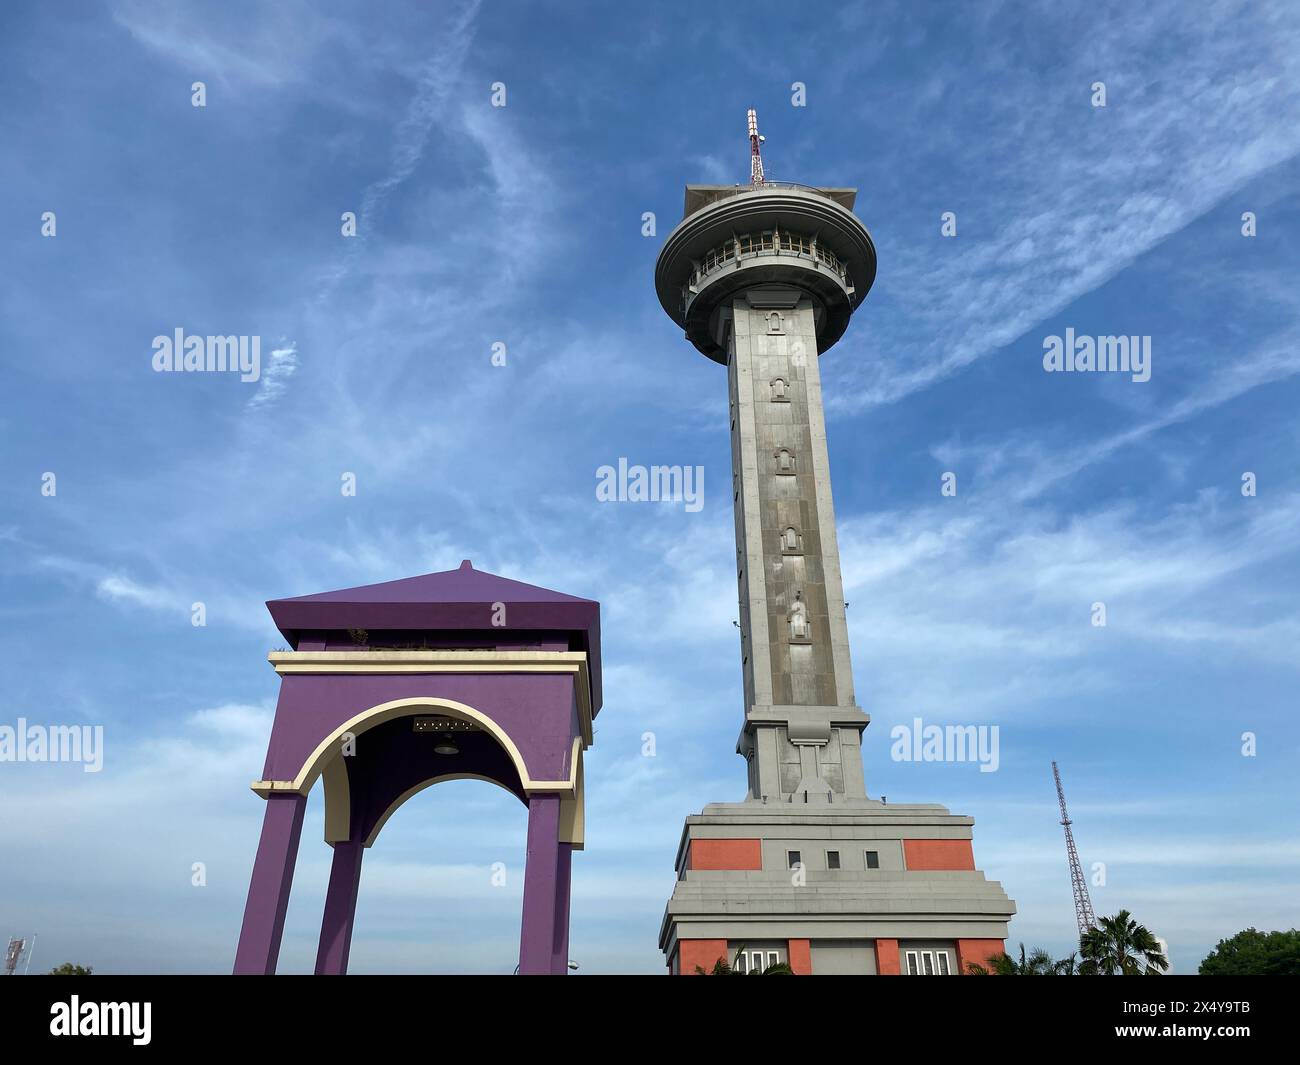 Tower in Masjid Agung Jawa Tengah or Great Mosque of Central Java area in Semarang, Indonesia Stock Photo